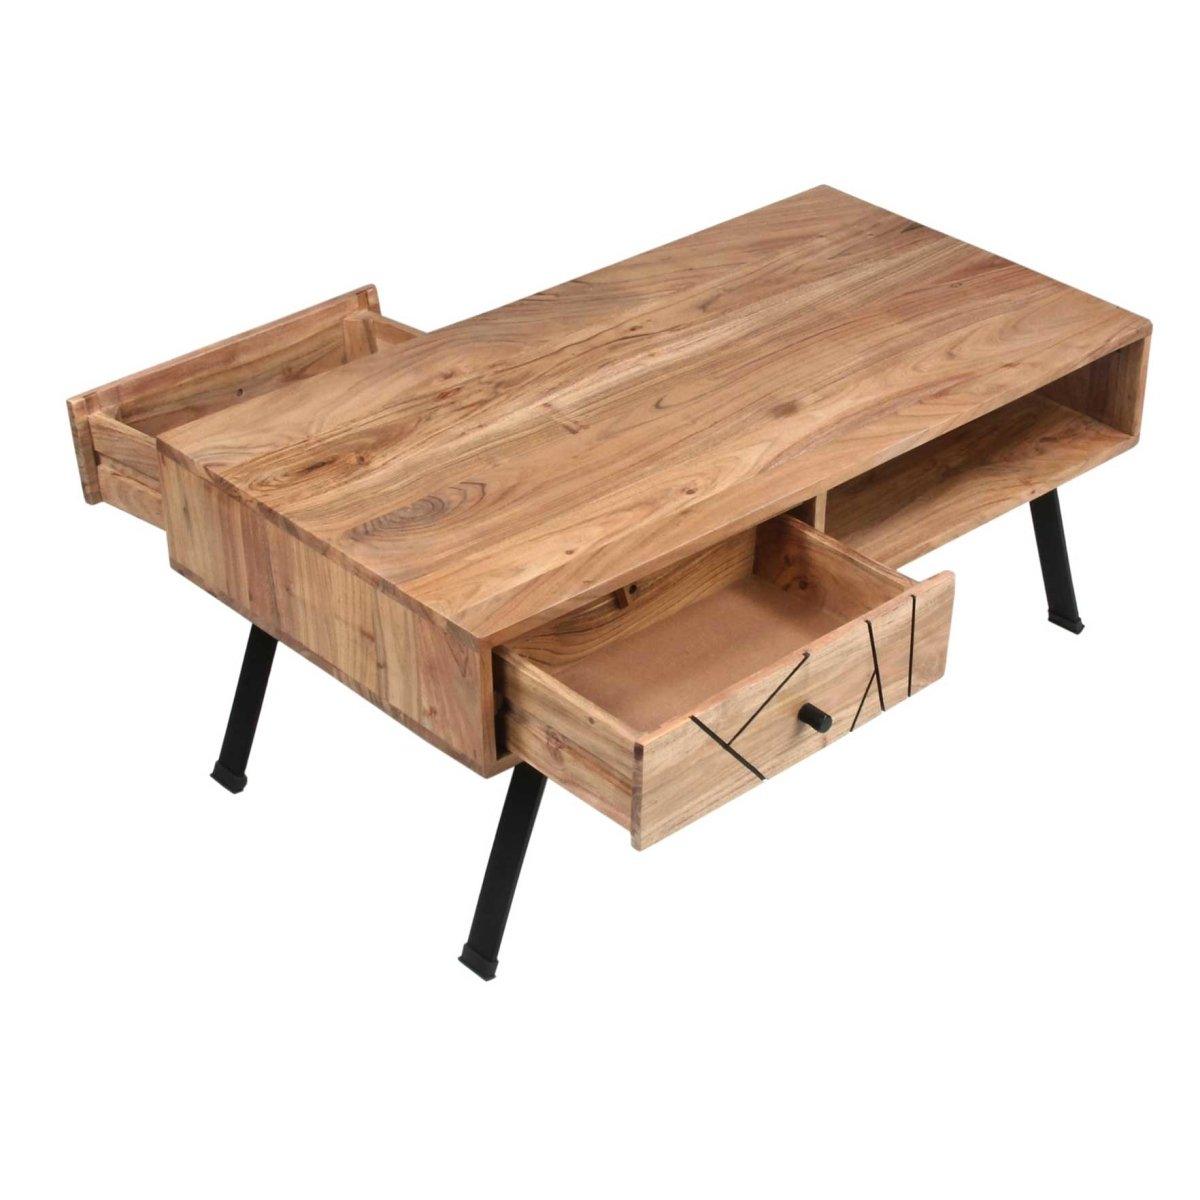 Scott Acacia wood Coffee Table - Rustic Furniture Outlet